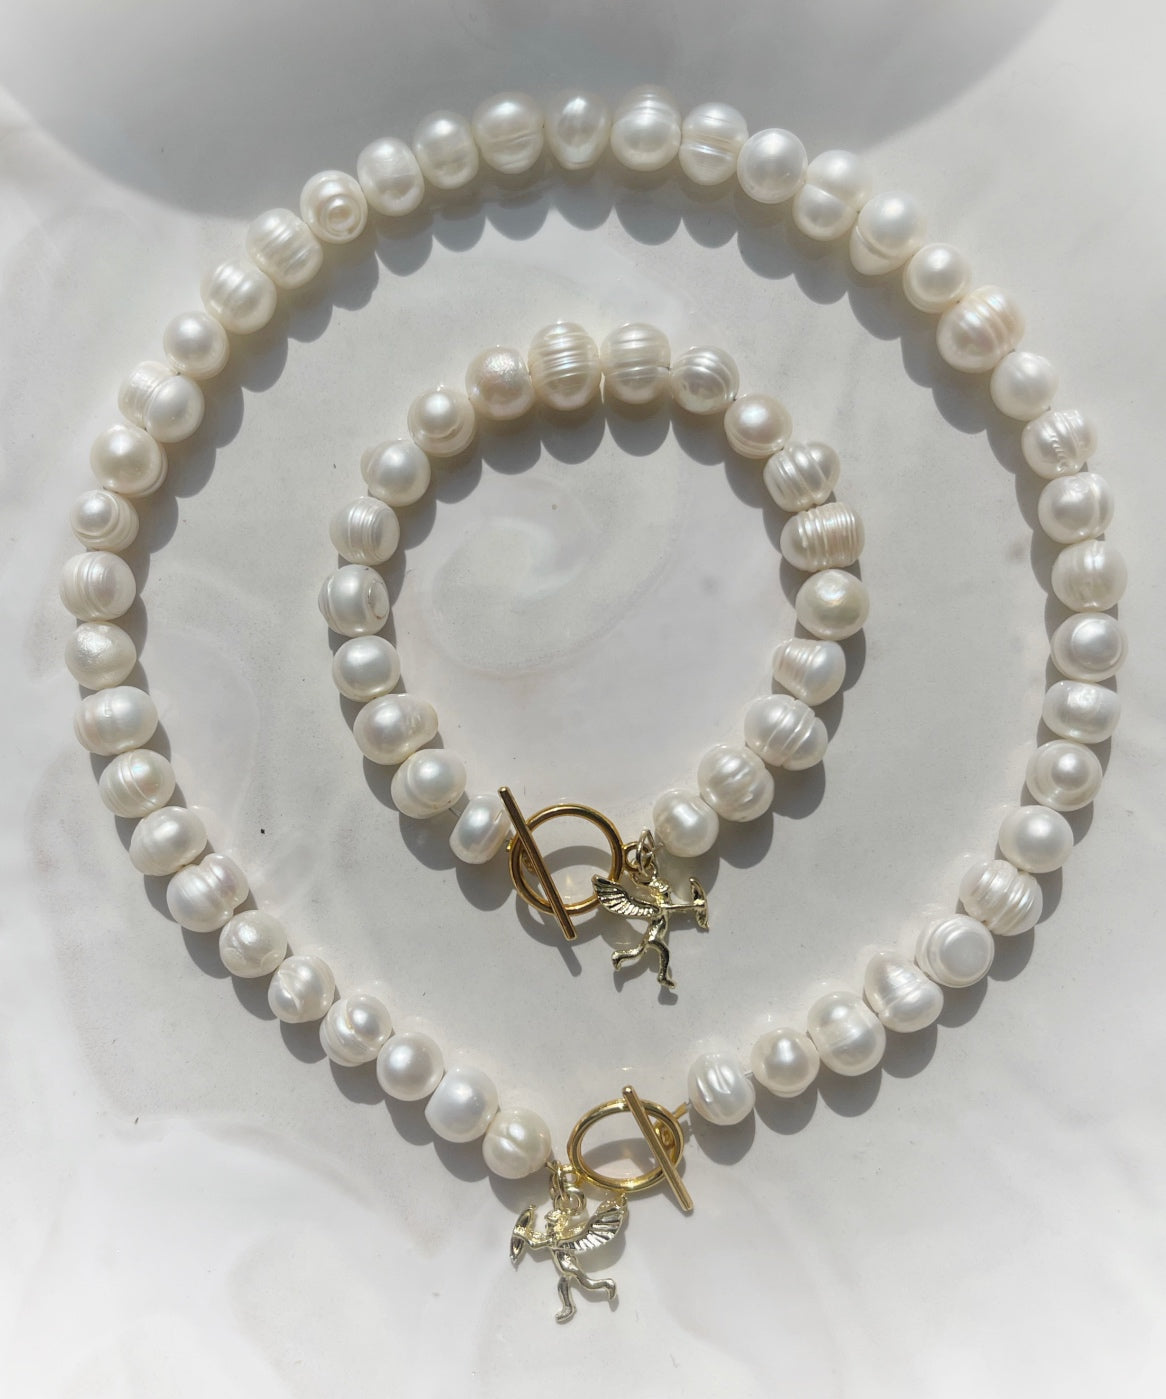 White pearl charm necklace and bracelet matching set with dainty gold Cupid / cherub charm, classic white pearl jewelry, summer jewelry